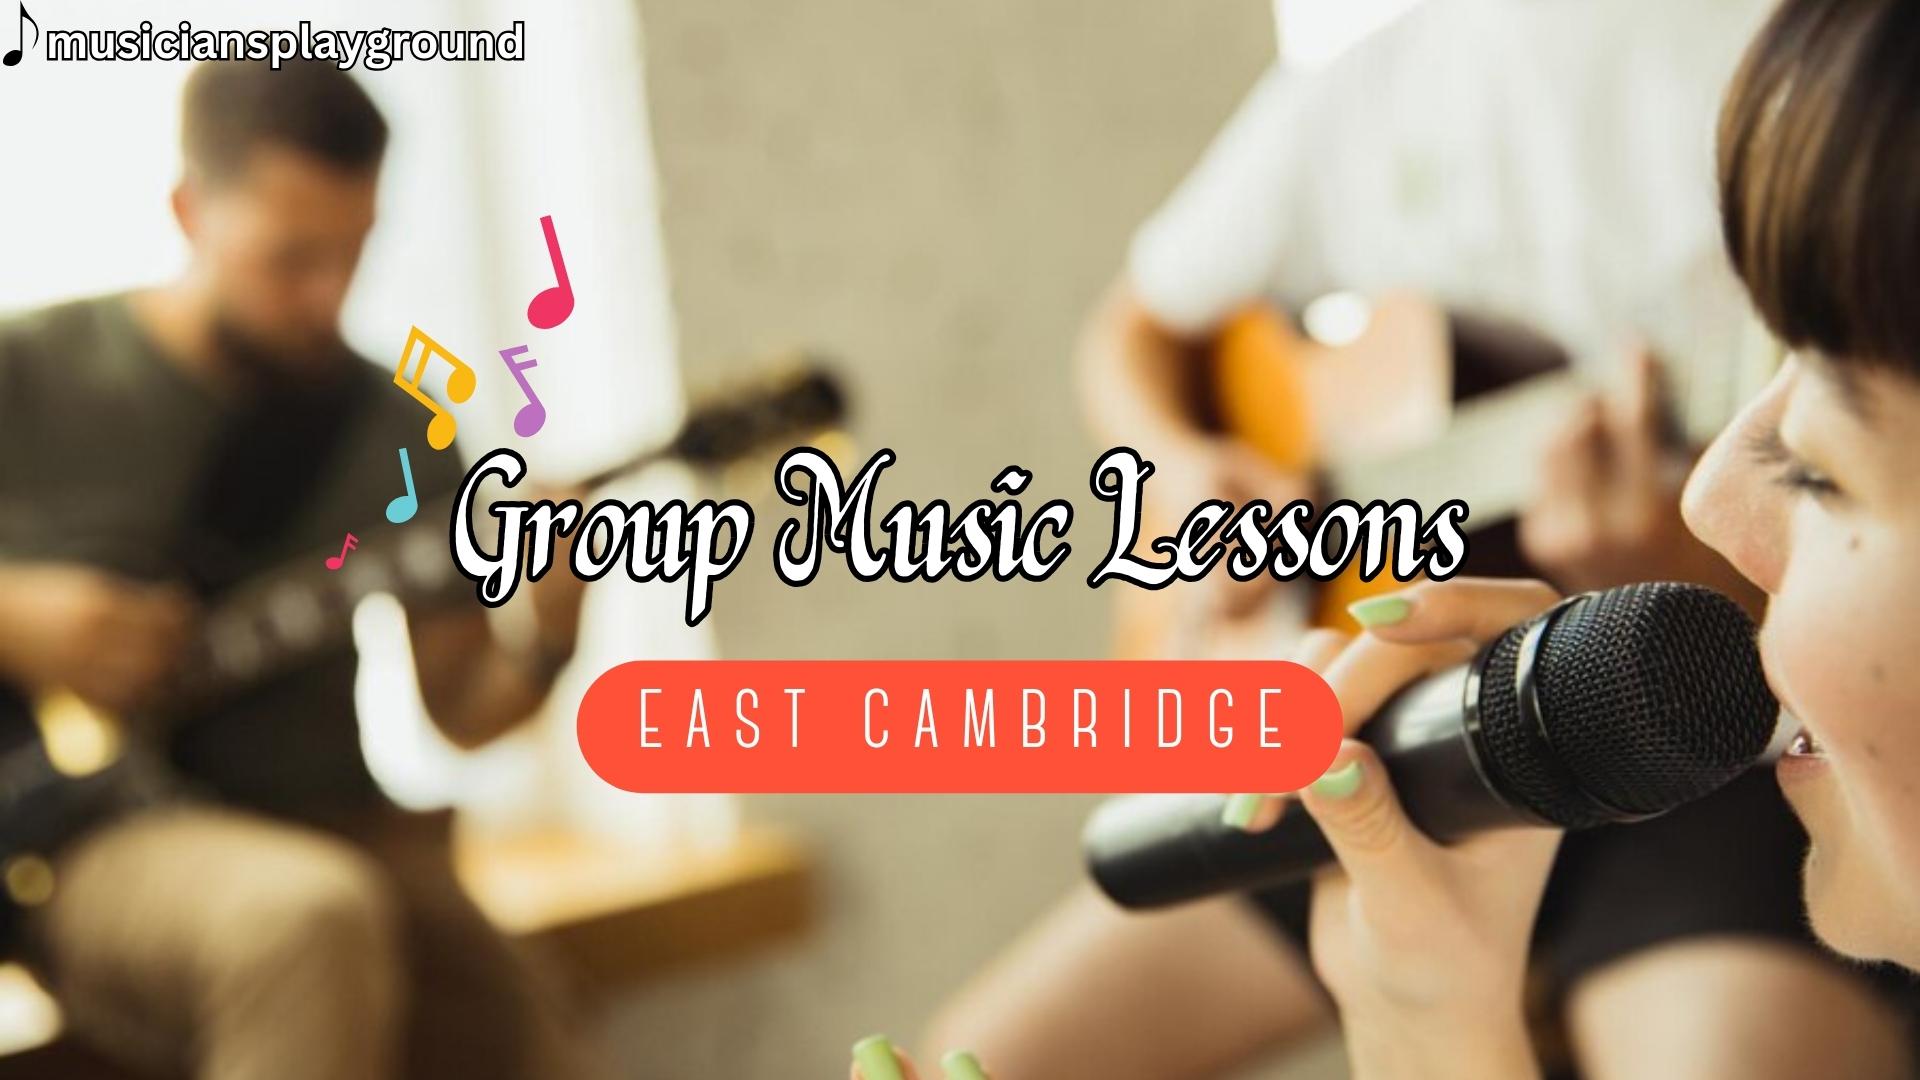 Group Music Lessons in East Cambridge, Massachusetts: Collaborative Music Learning at Musicians Playground